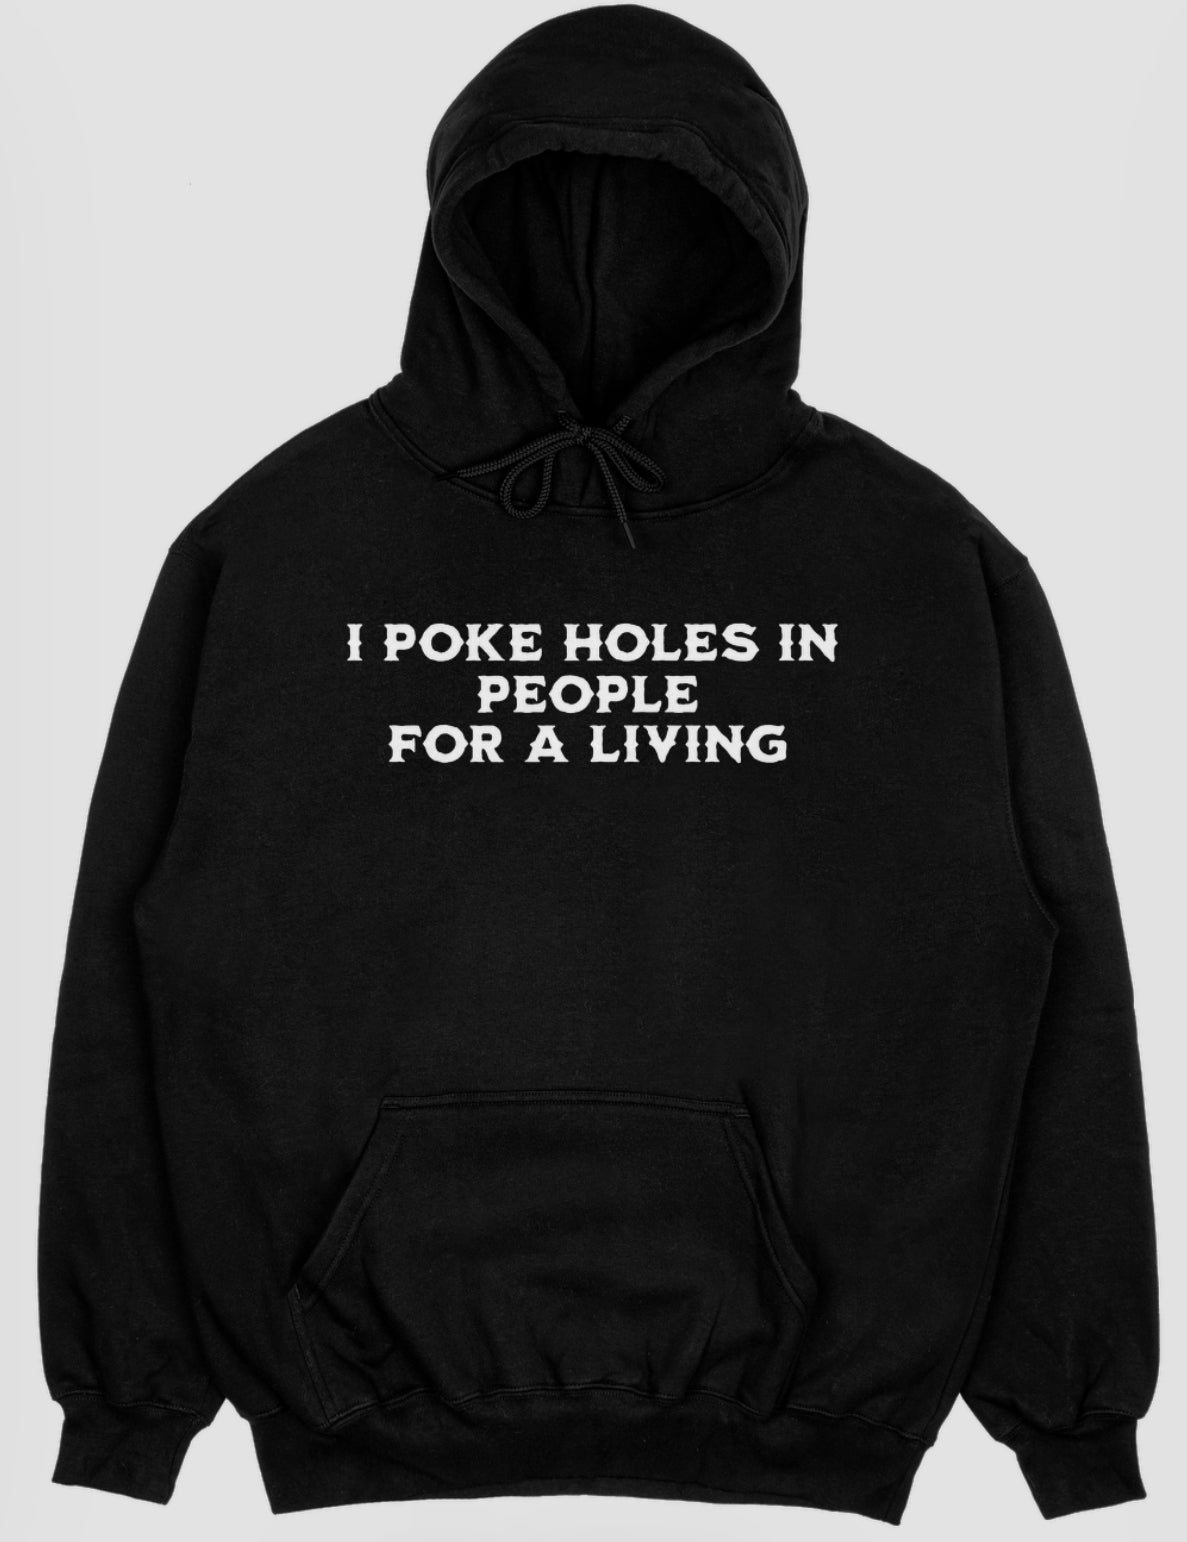 “I Poke Holes In People For A Living” Shirt